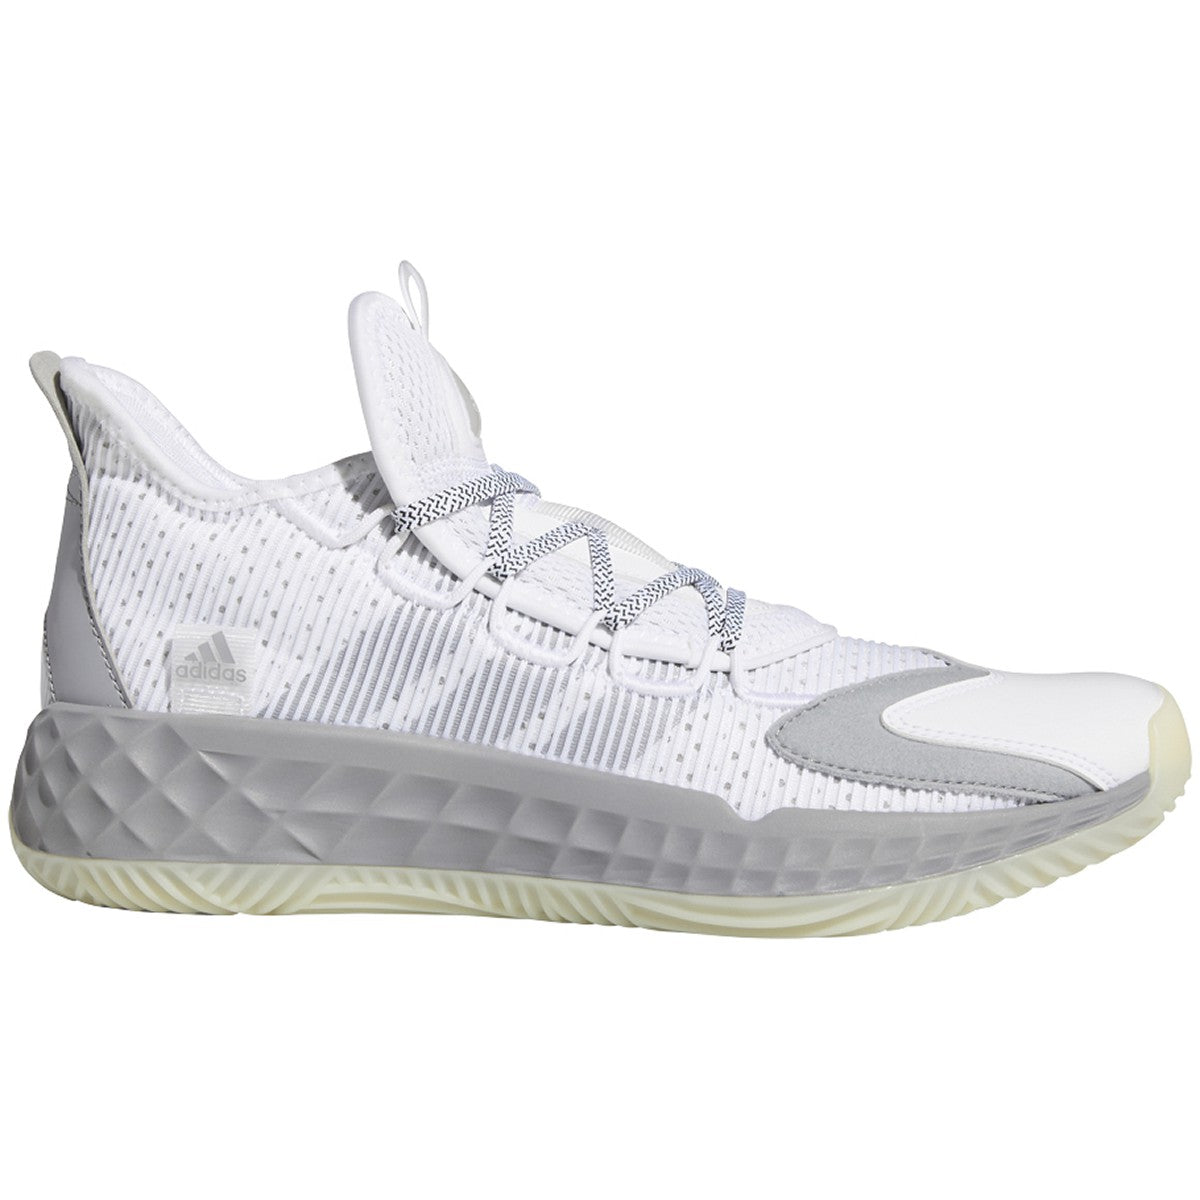 boost basketball shoes